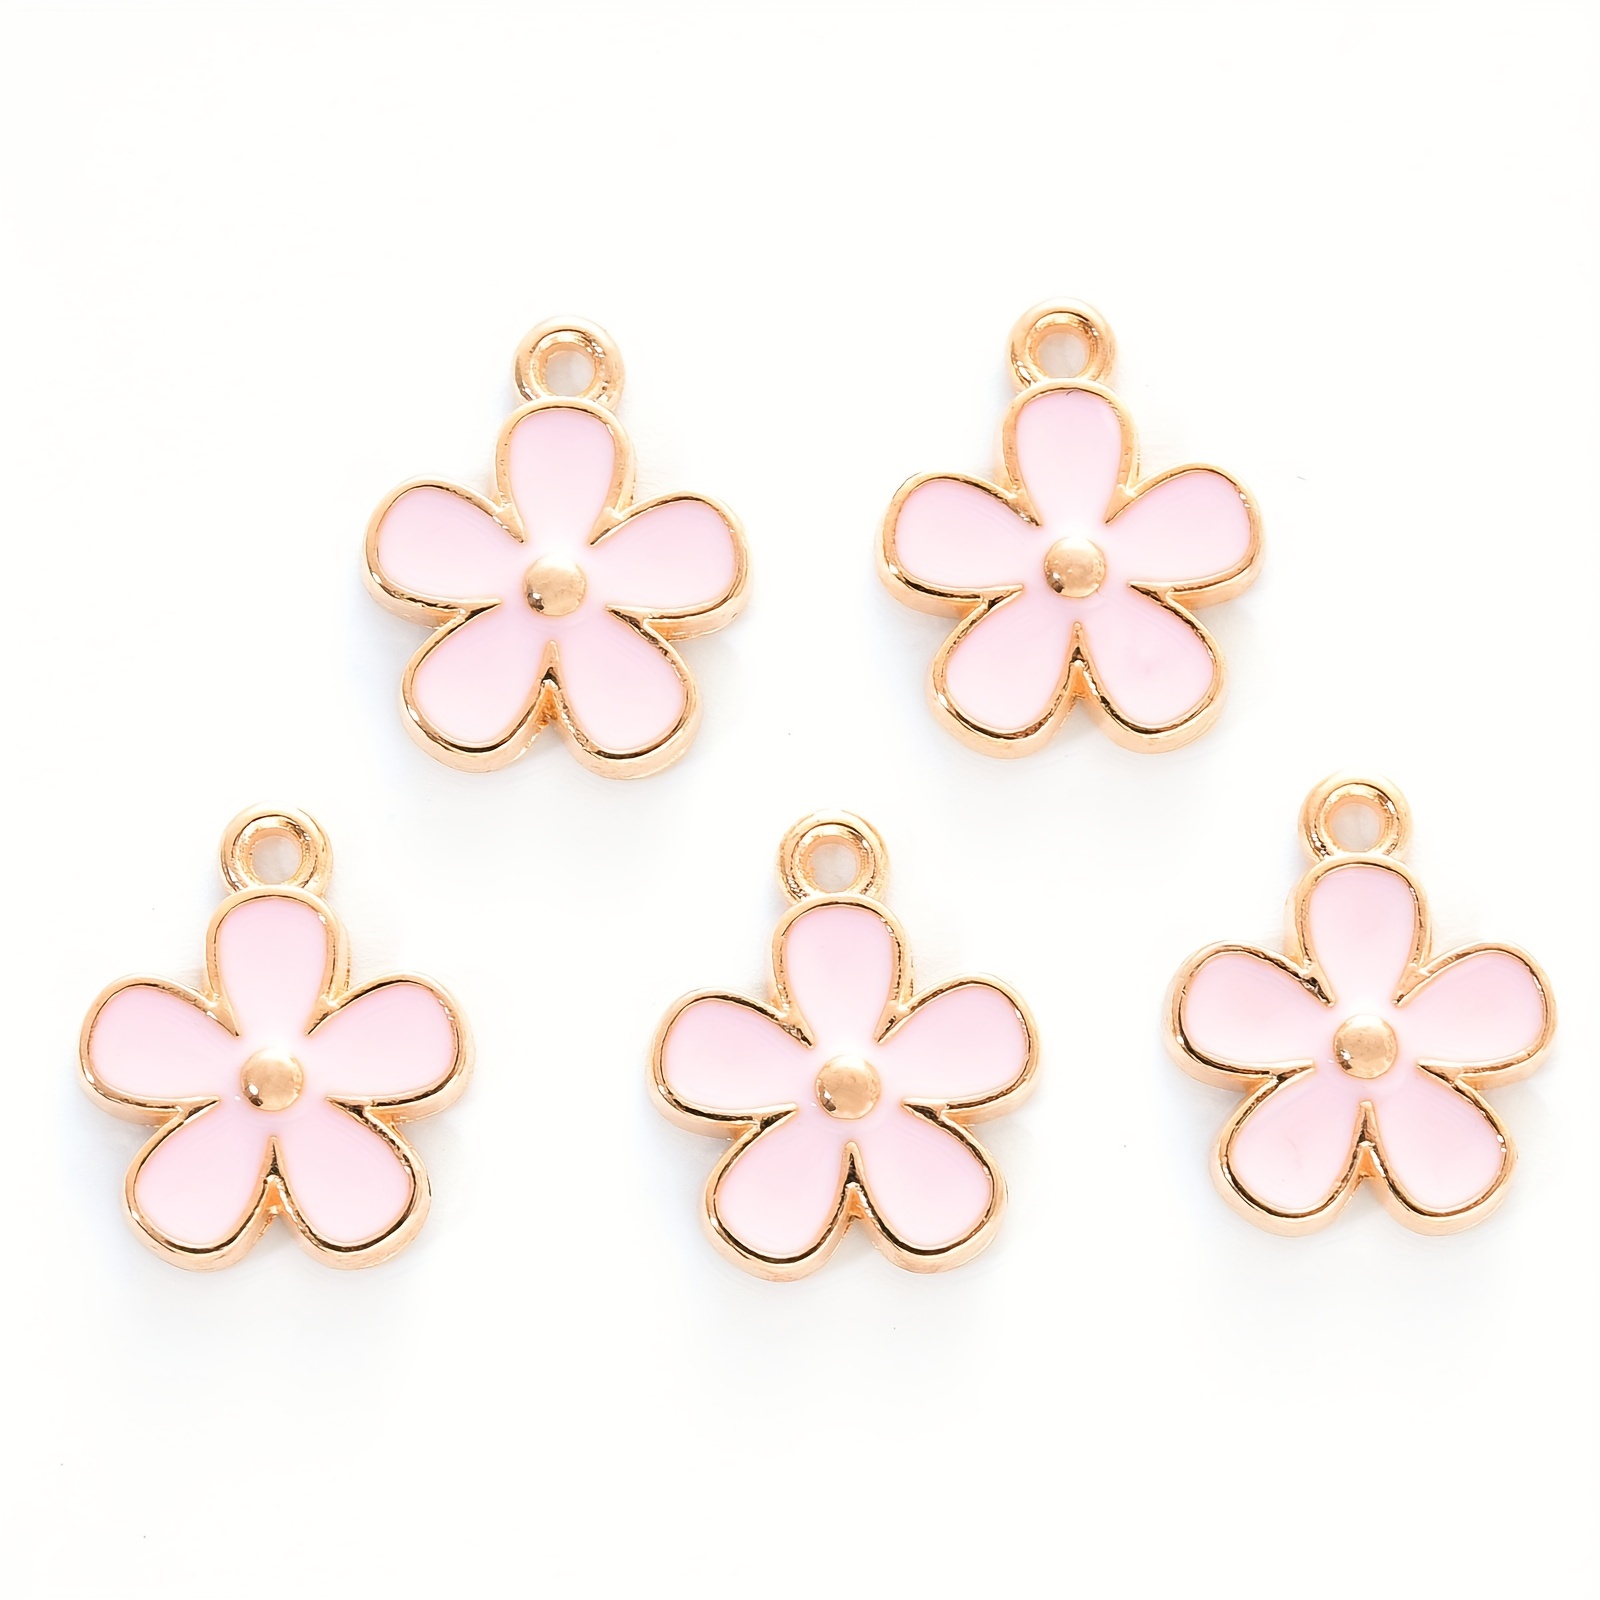 Clearance Silver Flower Drop Tiny Floral Charms (10pcs / 12mm x 14mm / Tibetan Silver / 2 Sided) Small Flower Pendant Spring Jewellery Making CHM2224